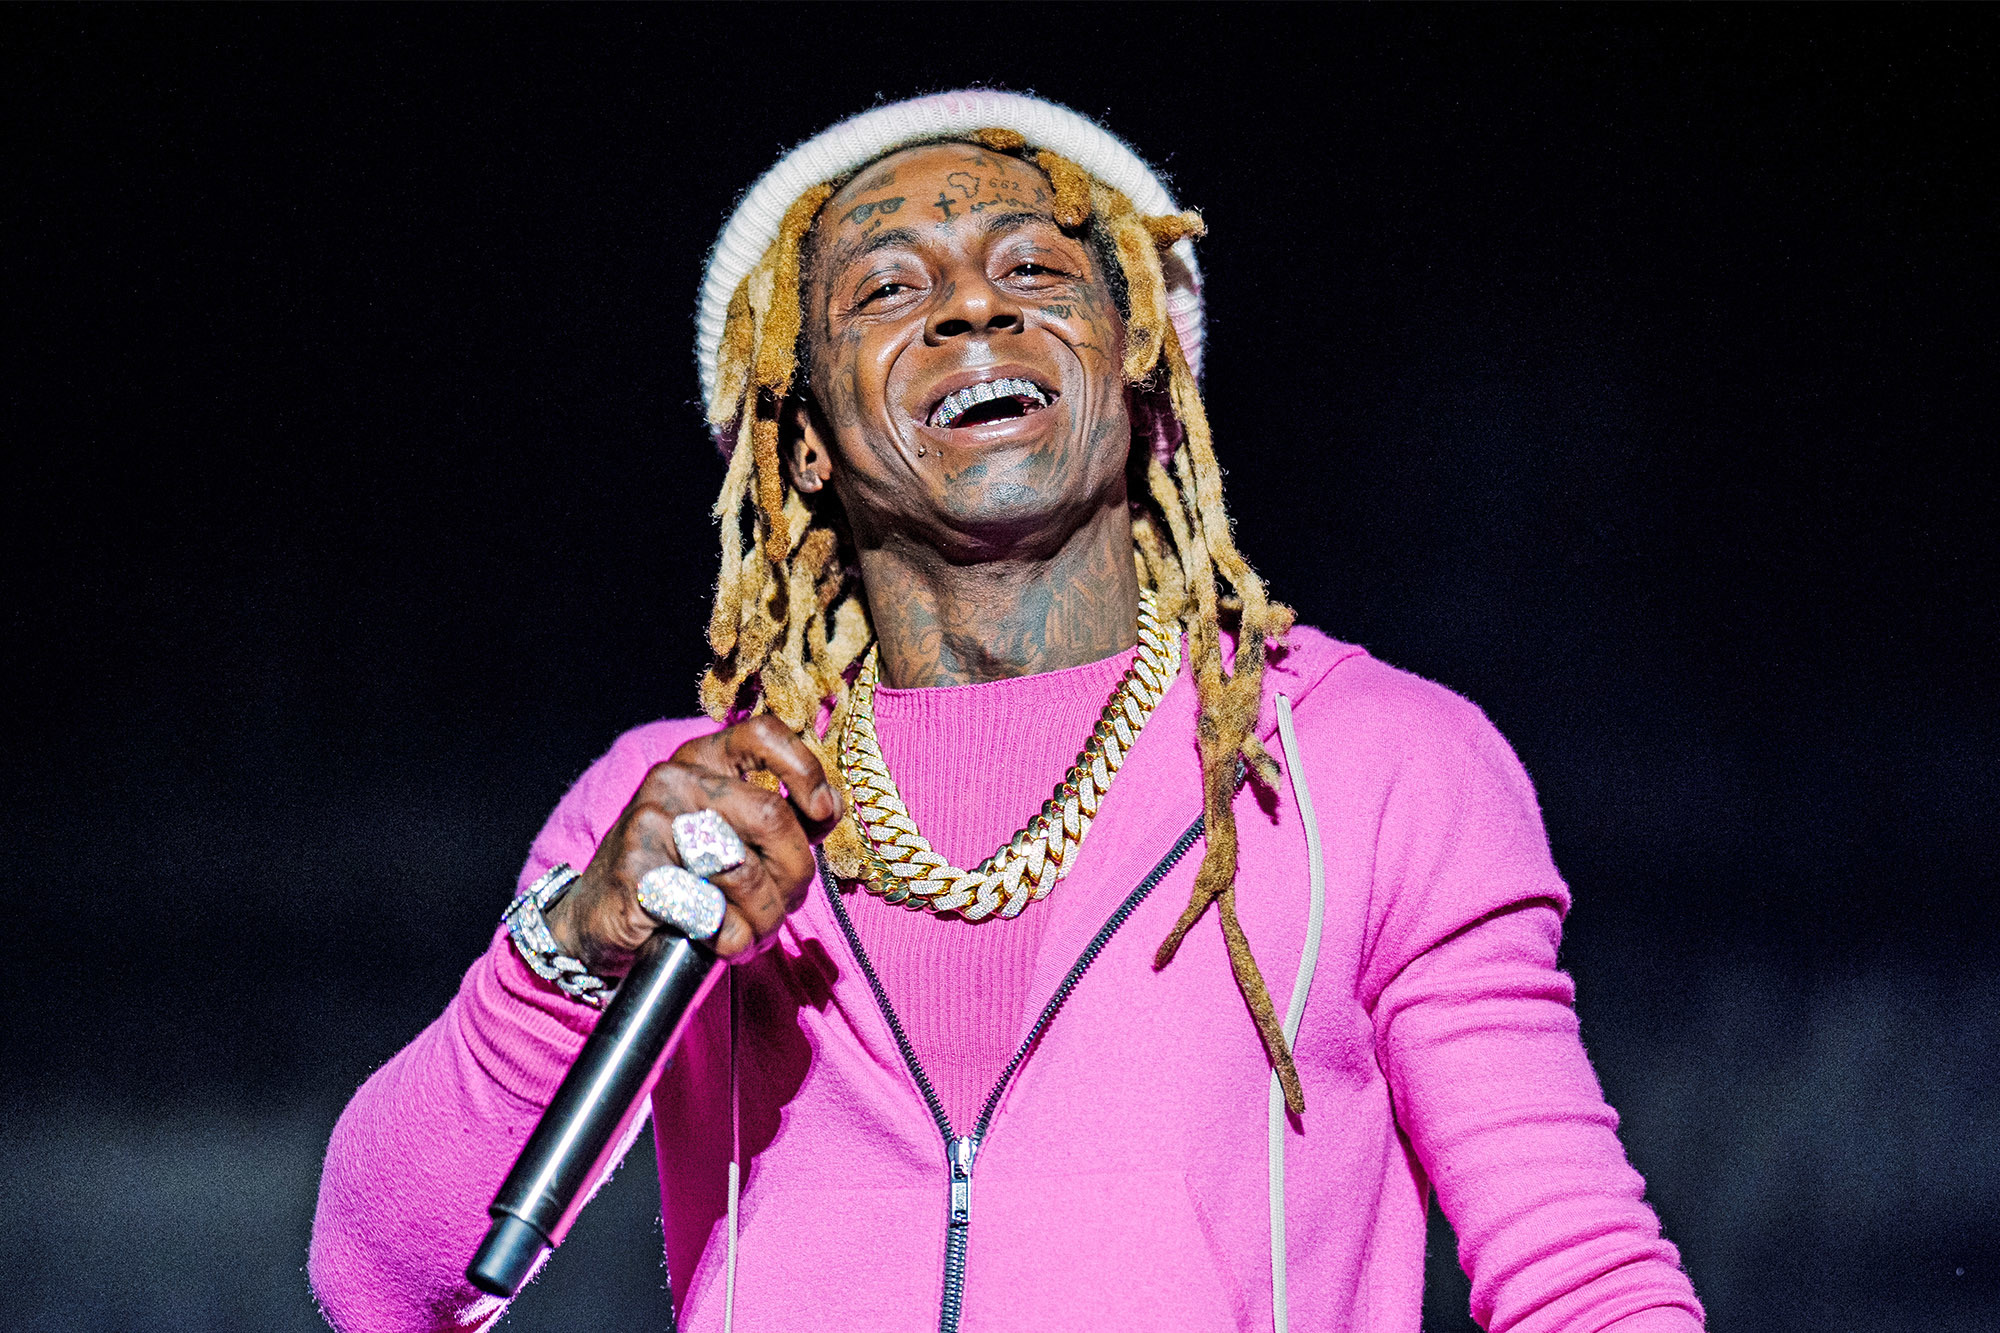 Lil Wayne Is Set to Perform at the MTV VMAs for the First Time in 10 Years